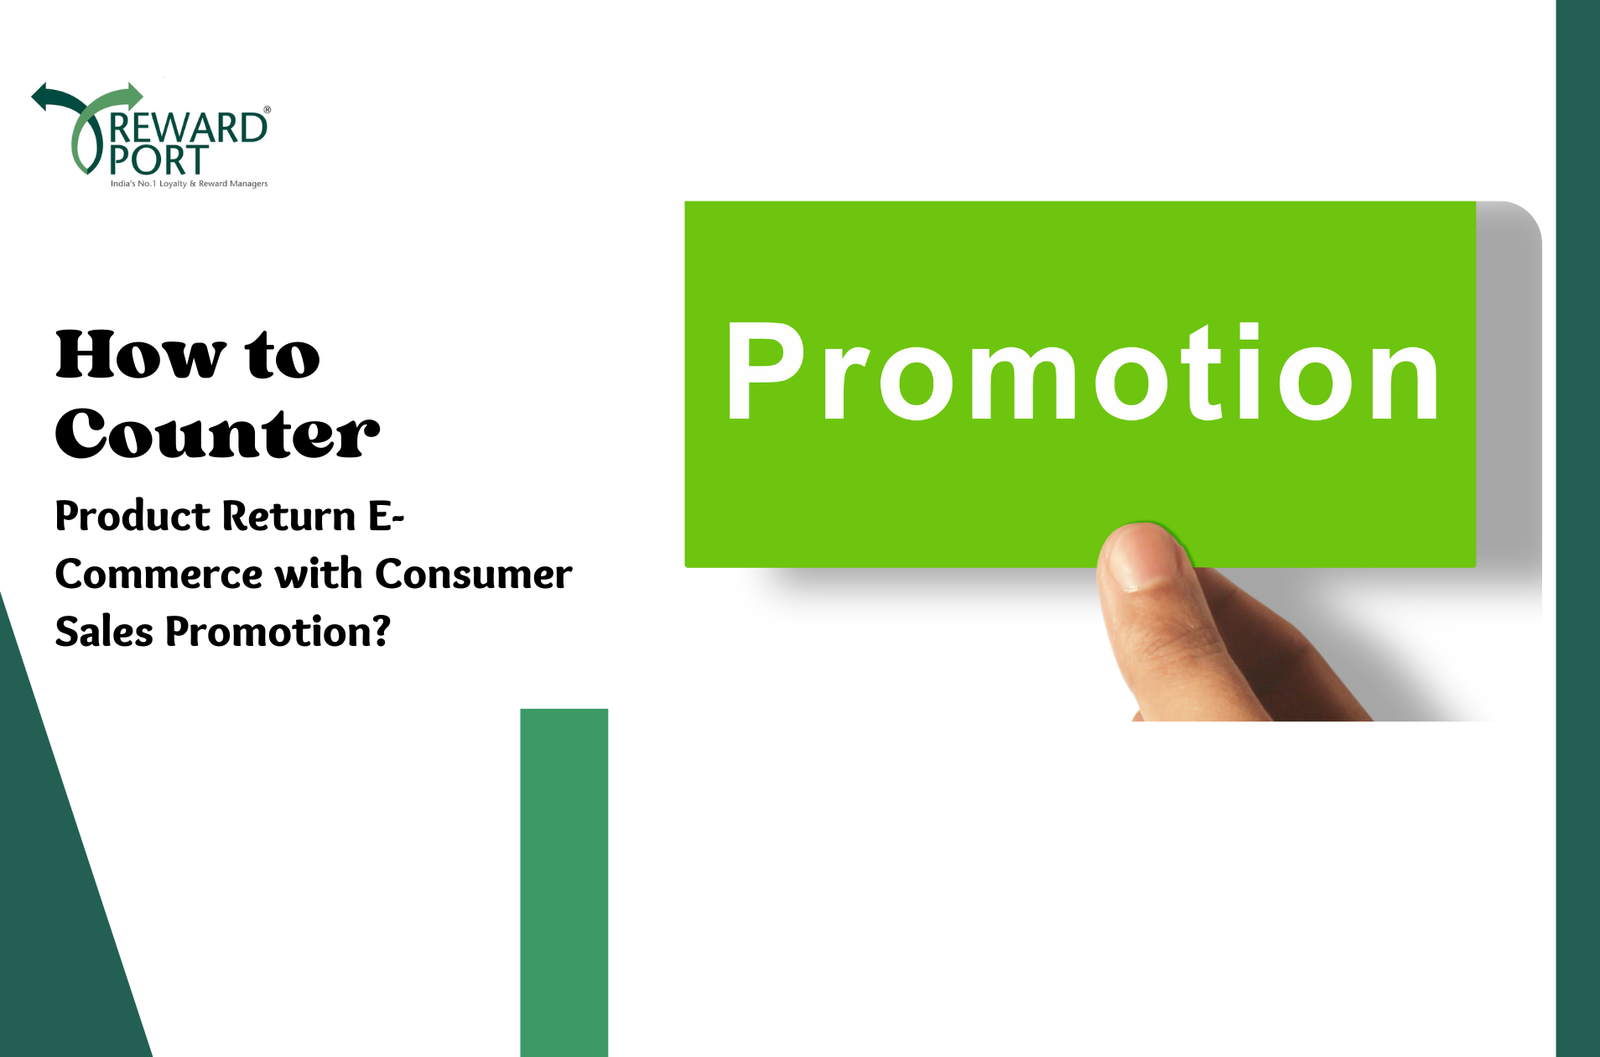 How to Counter Product Return E-Commerce with Consumer Sales Promotion